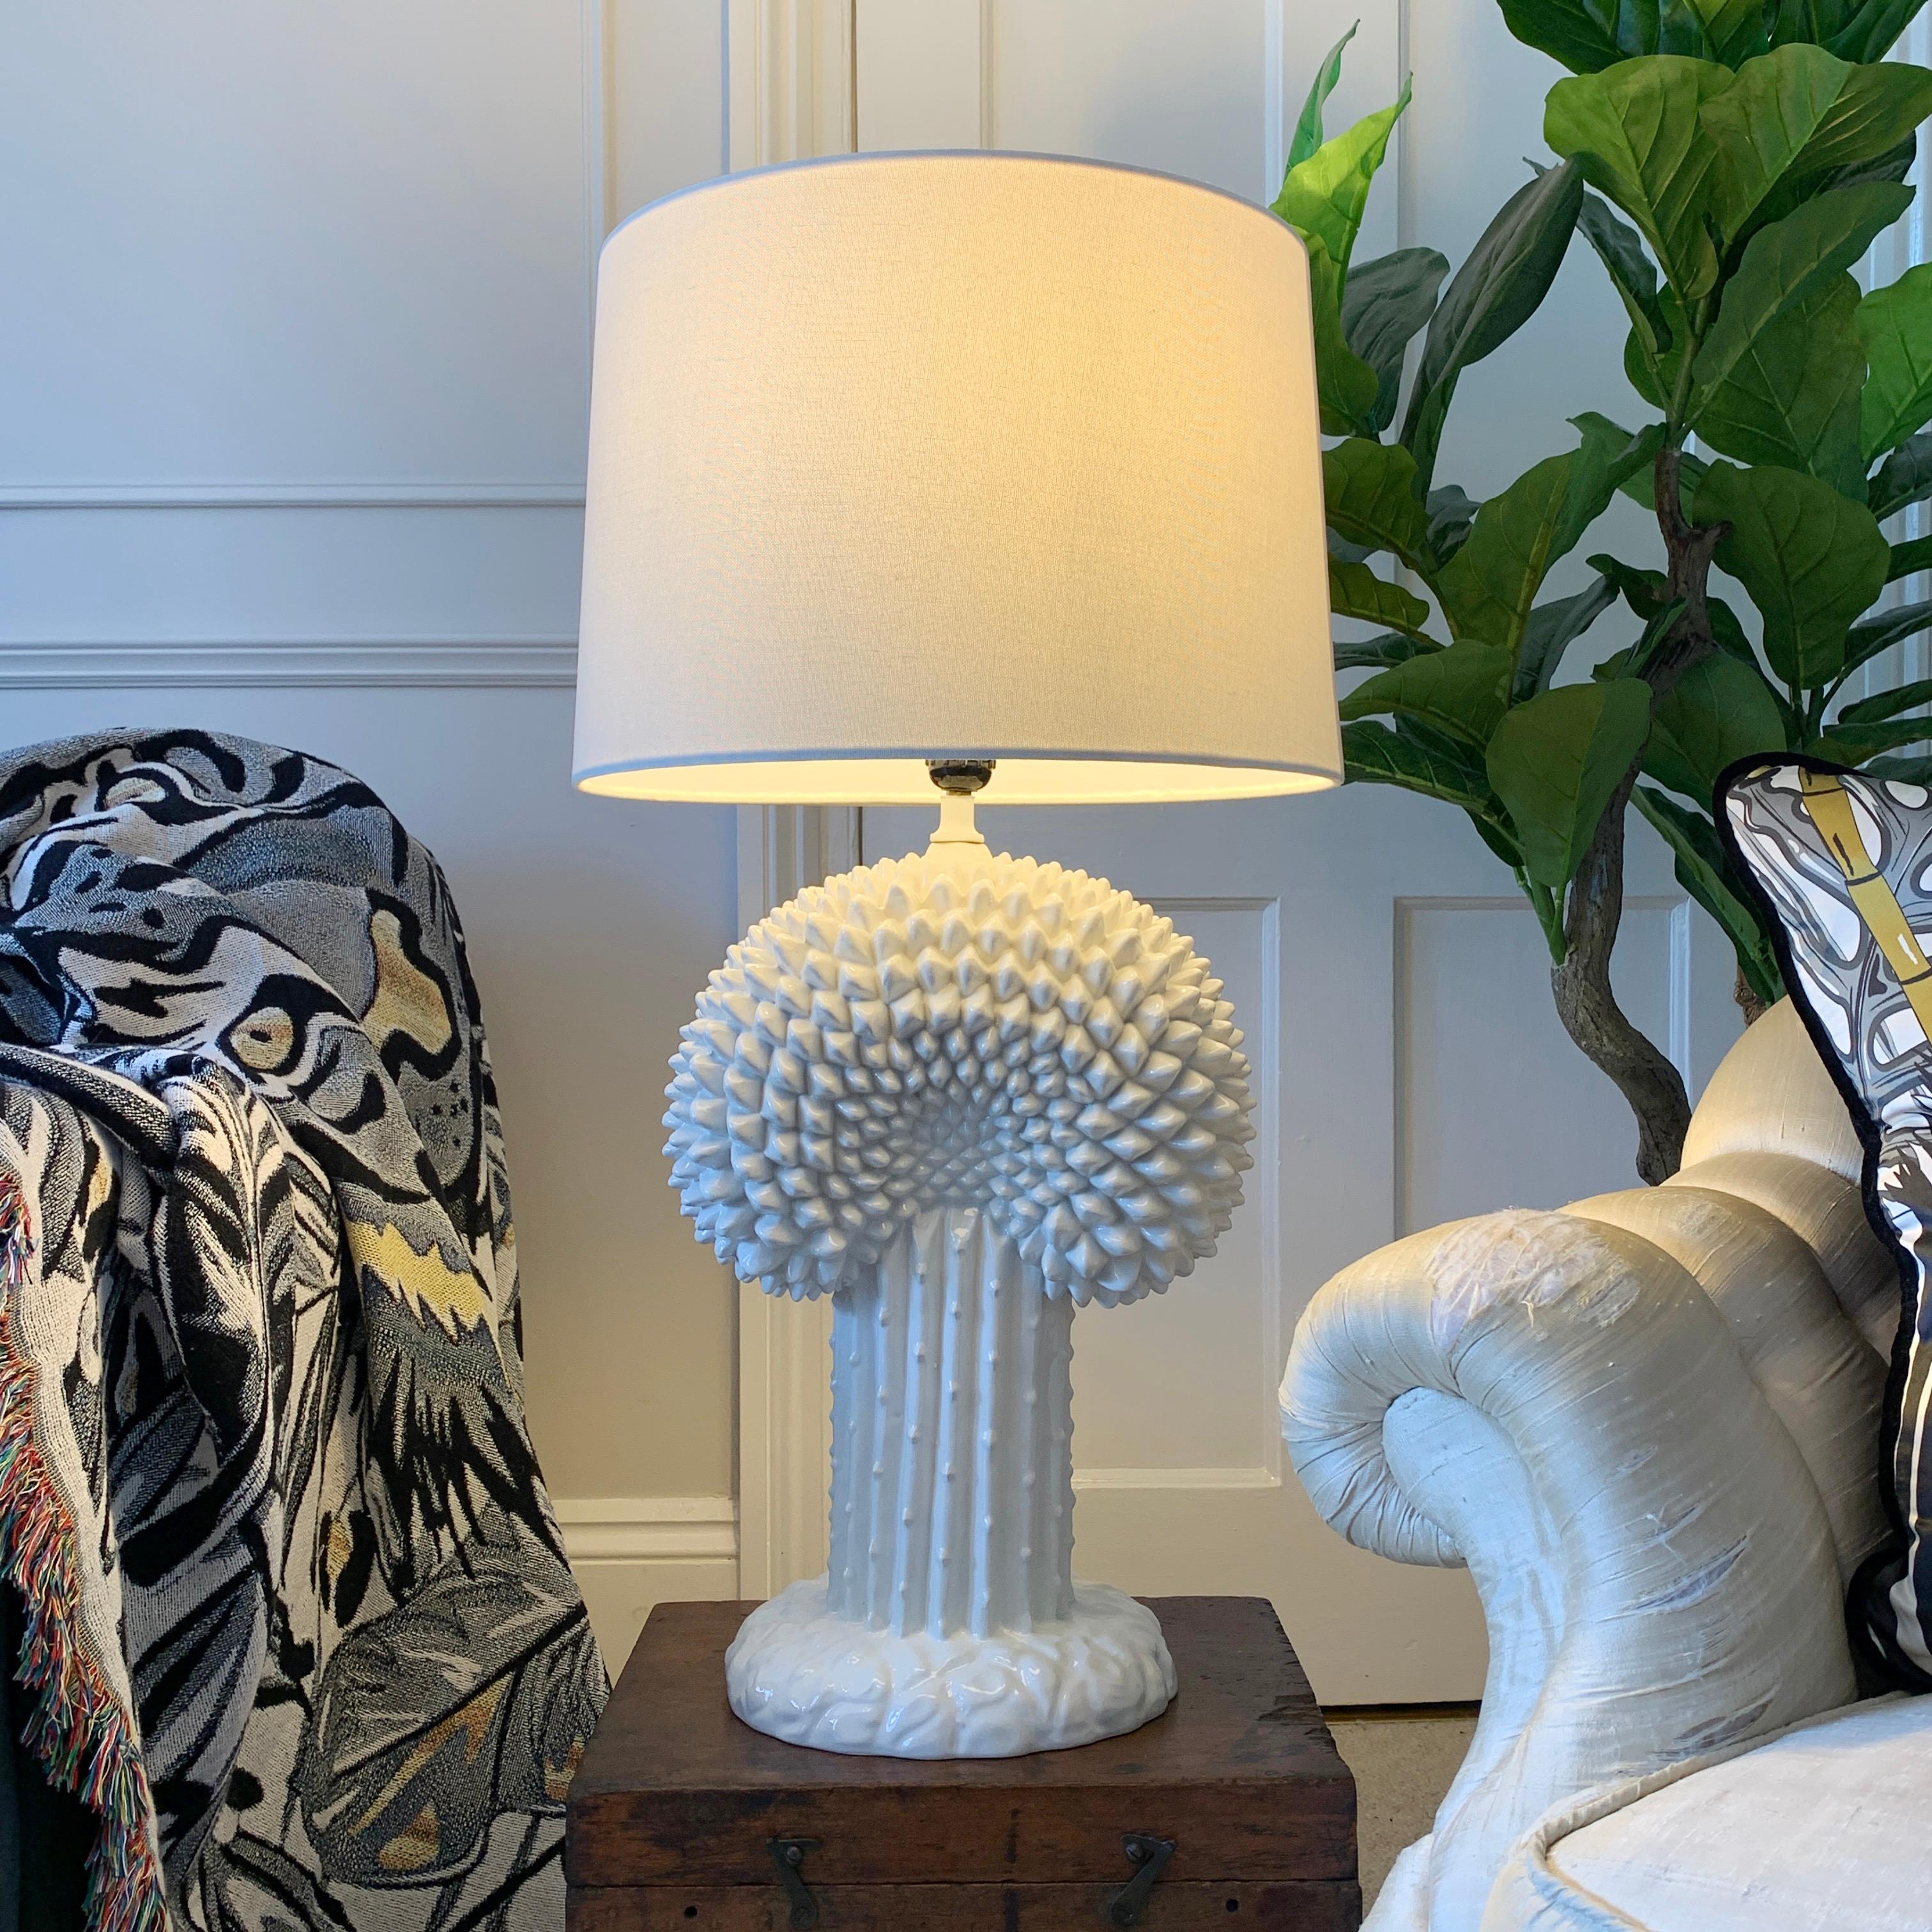 1970’s ceramic cactus lamp Italian

These lamps are widely considered to be a design by the American Decorator and artist John Dickinson, however the only visible mark is one that indicates they were made in Italy.

The lamp is a beautifully